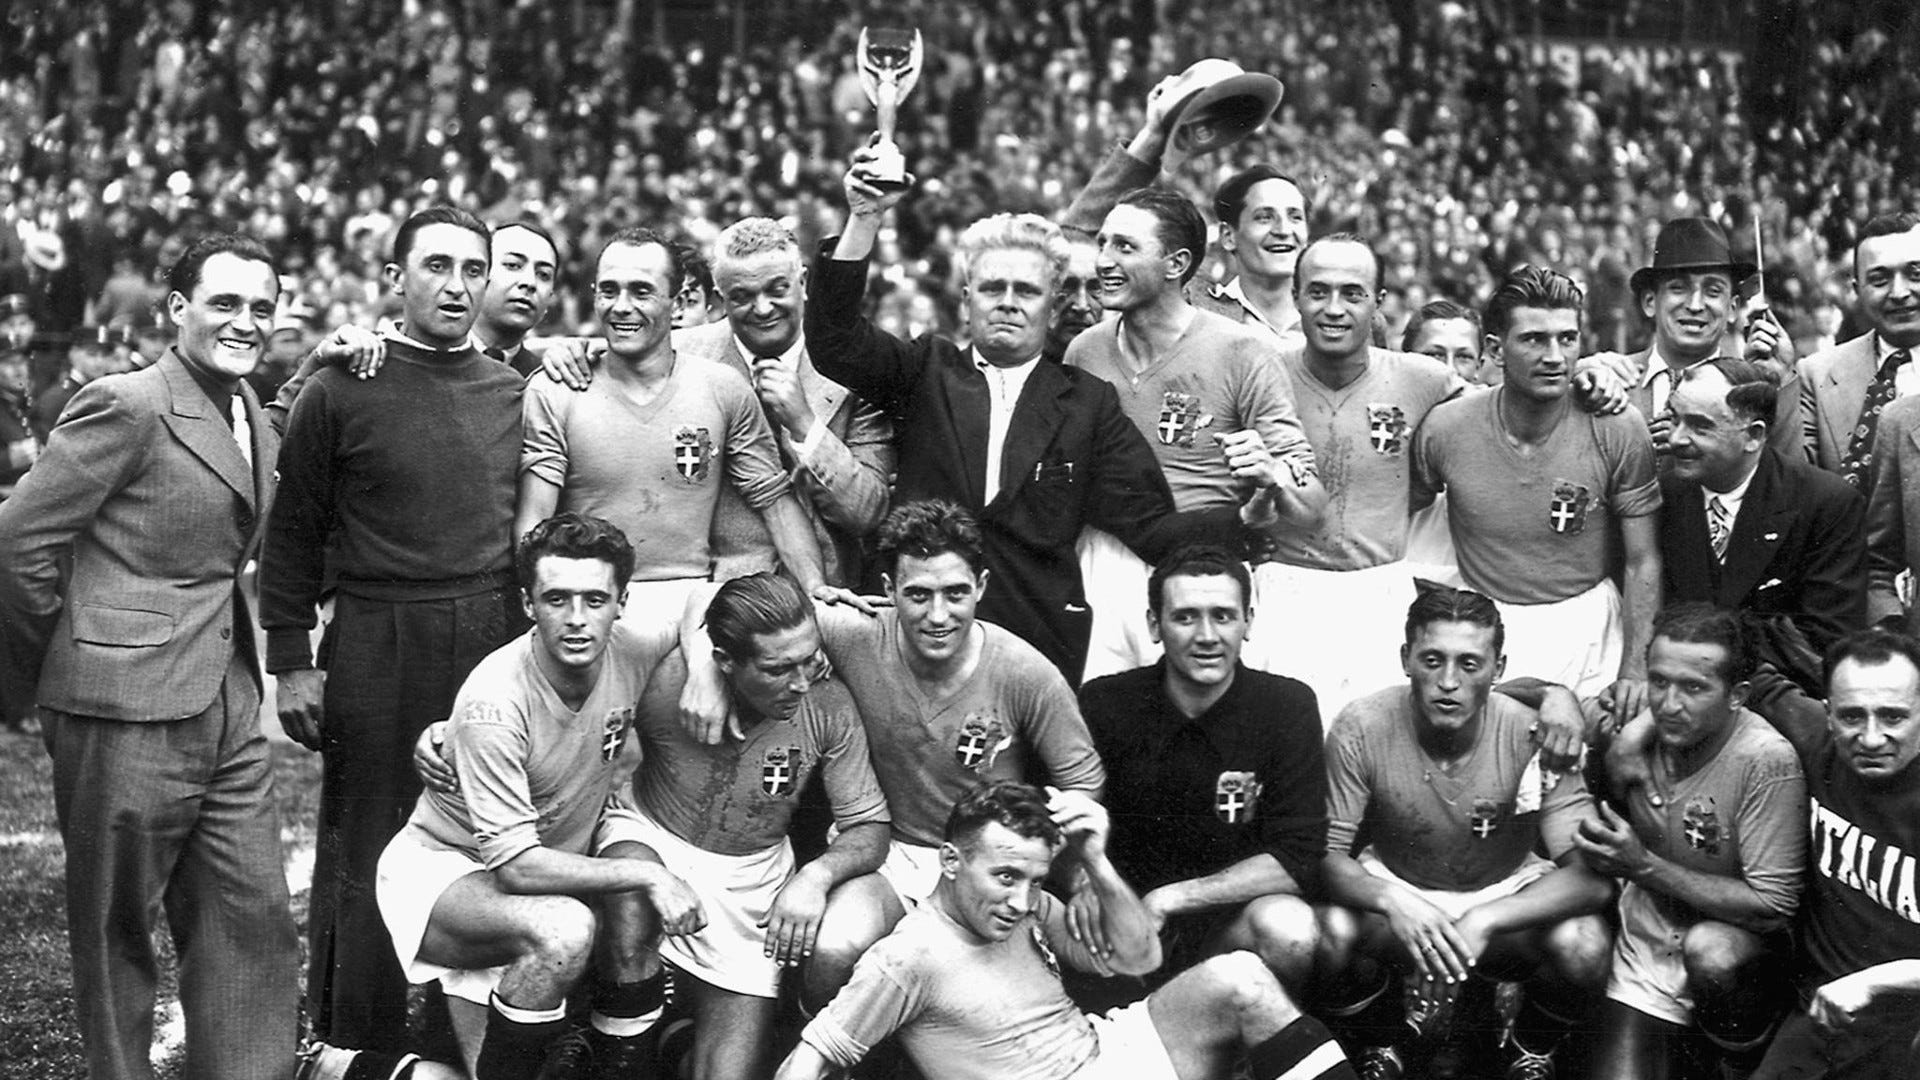 Italy 1938 World Cup